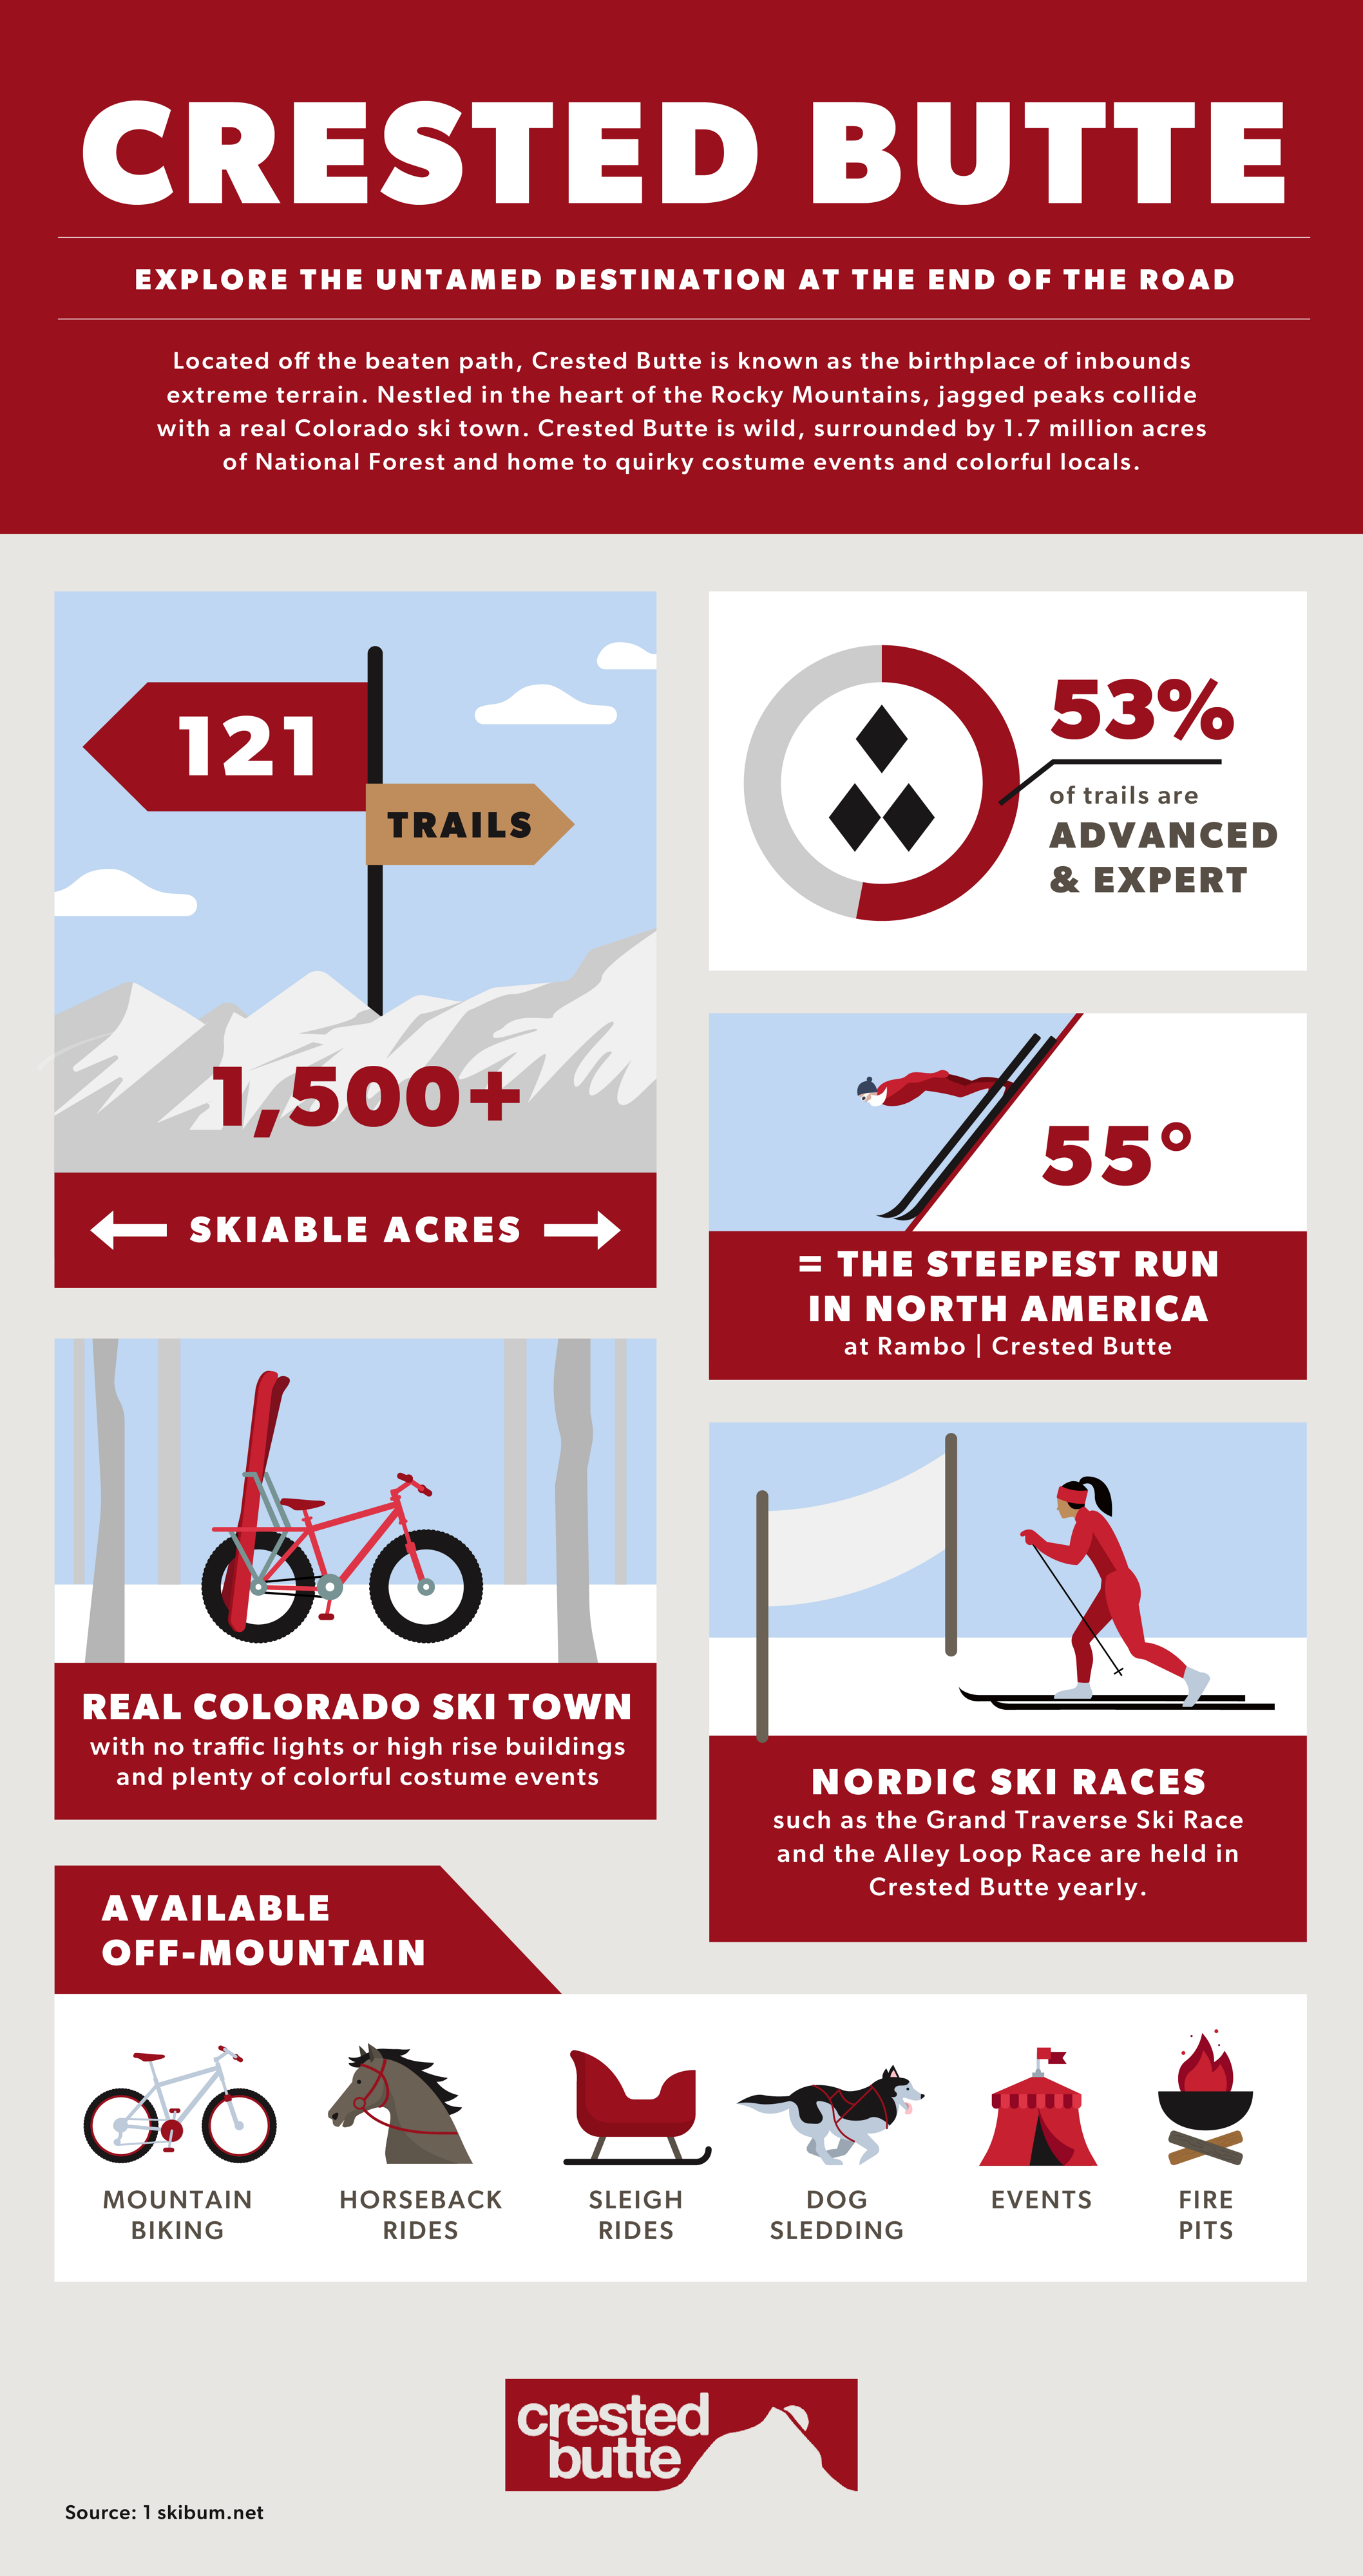 An infographic about Crested Butte Ski Resort featuring data about the 121 trails, 1500+ skiable acres and Rambo- the steepest run in North America.